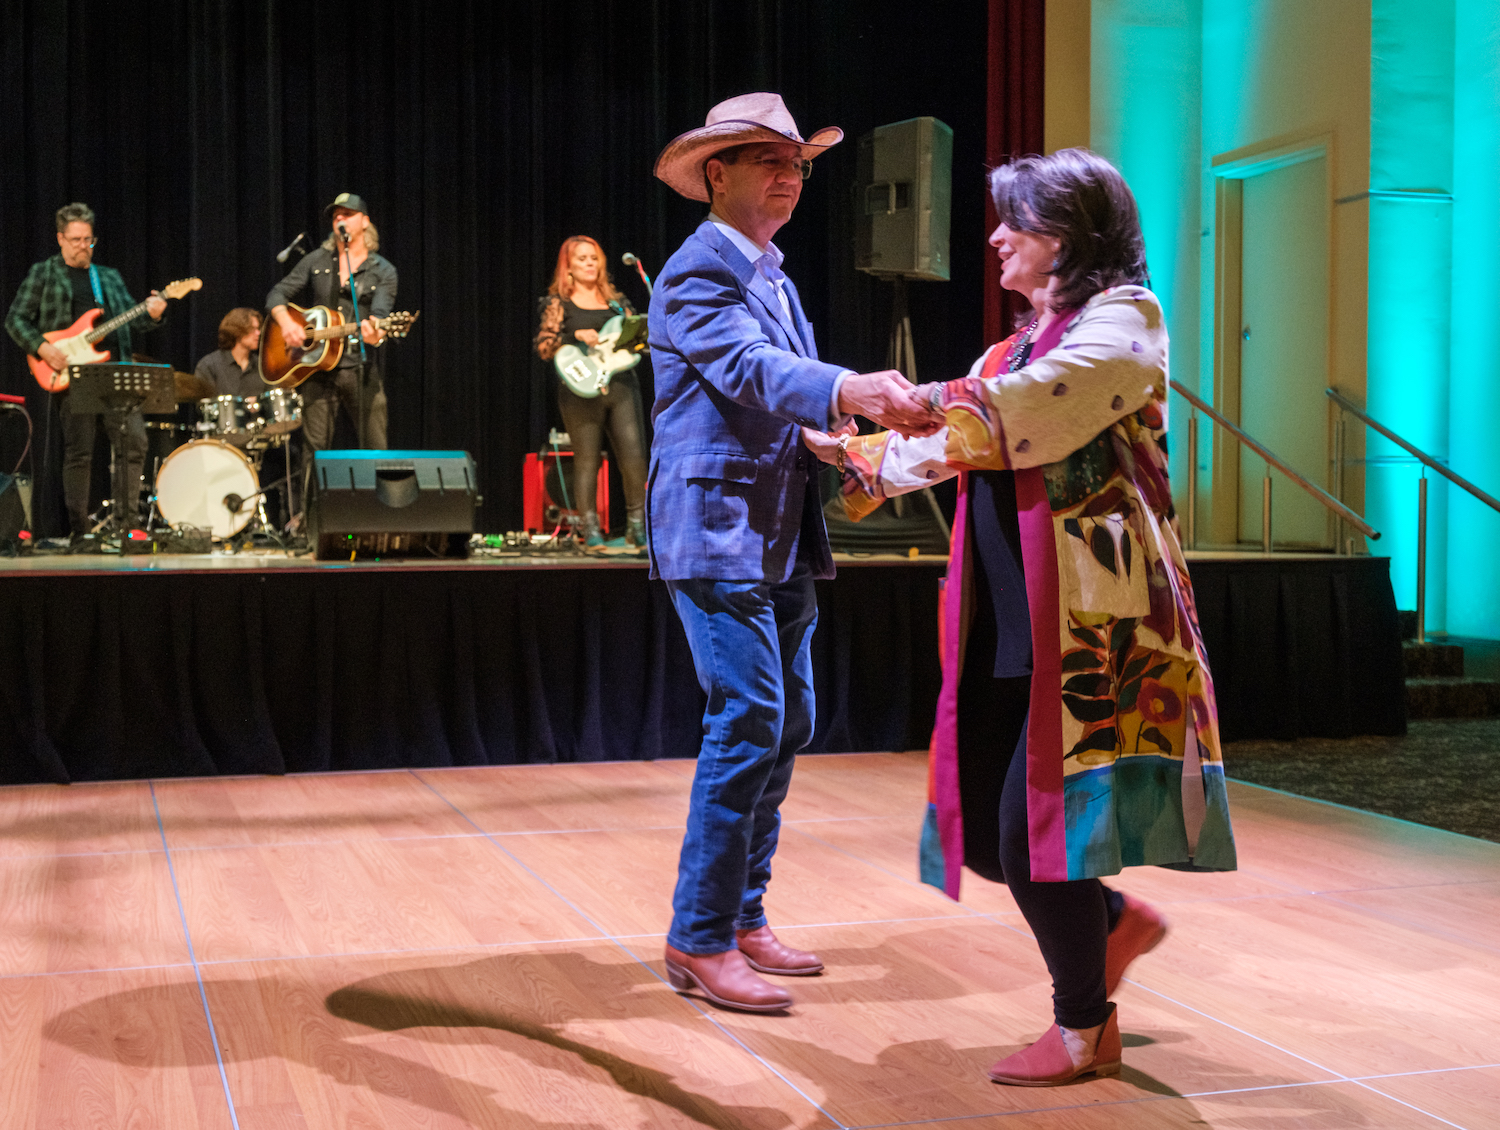 President James W. Nemitz, Ph.D., and his wife, Nancy Bulla Nemitz, dance at the WVSOM Wild West Benefit paid tribute to Bob Foster, D.O., who recently retired after 45 years of service to the school, most recently serving as its assistant dean for osteopathic medical education.